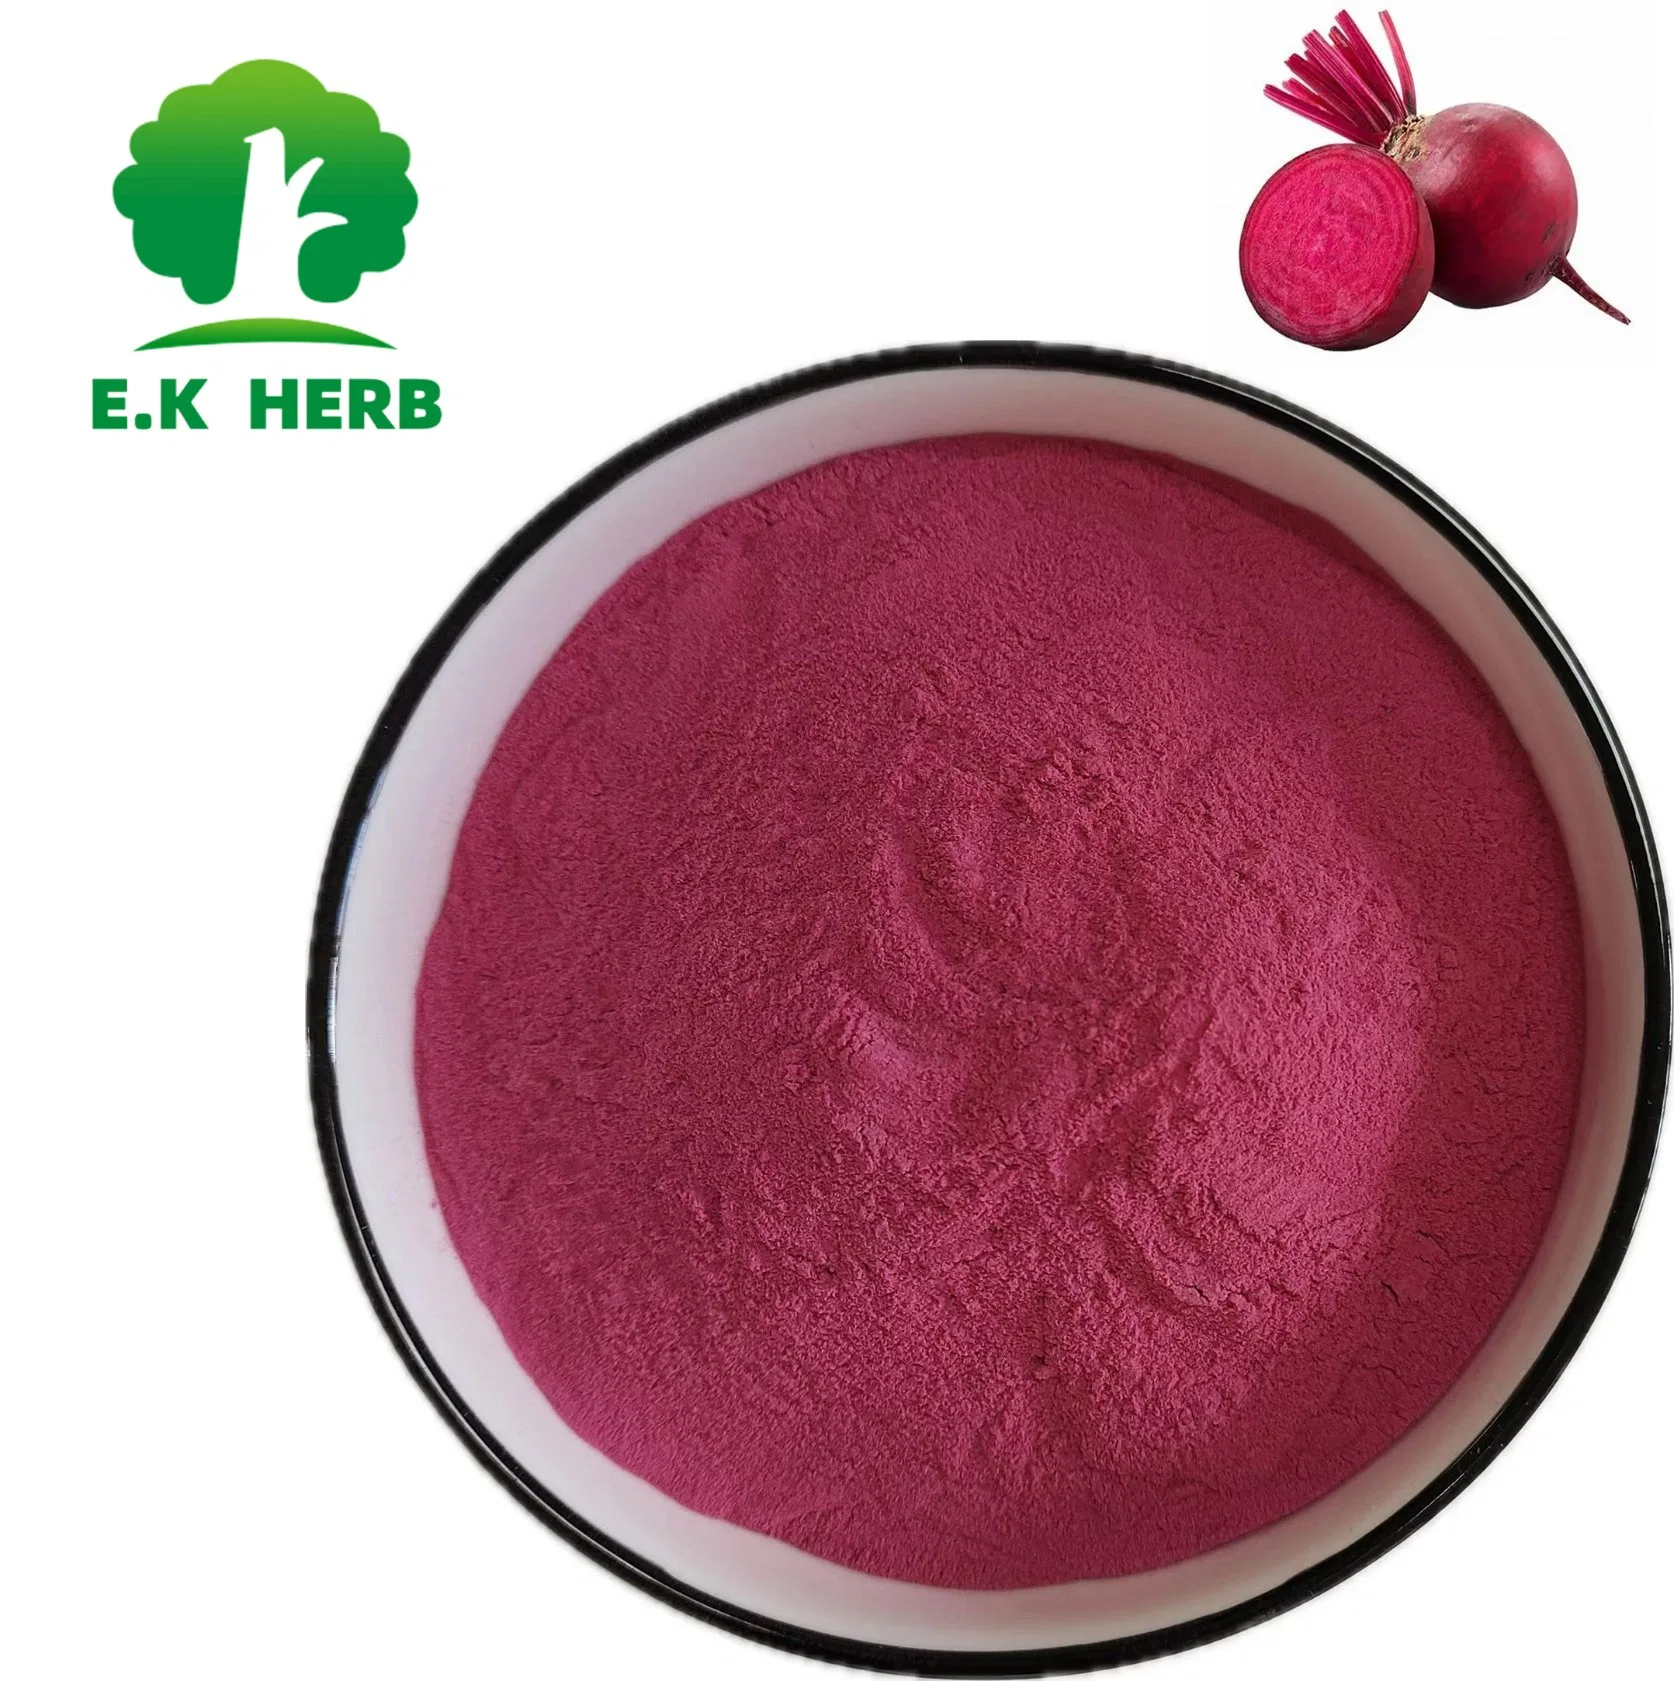 E. K Herb China Plant Extract Manufacturer Supply Wholesale Top Quality Natural Beta Vulgaris Beet Root Extract Powder 10: 1, 20: 1 Beet Root Extract